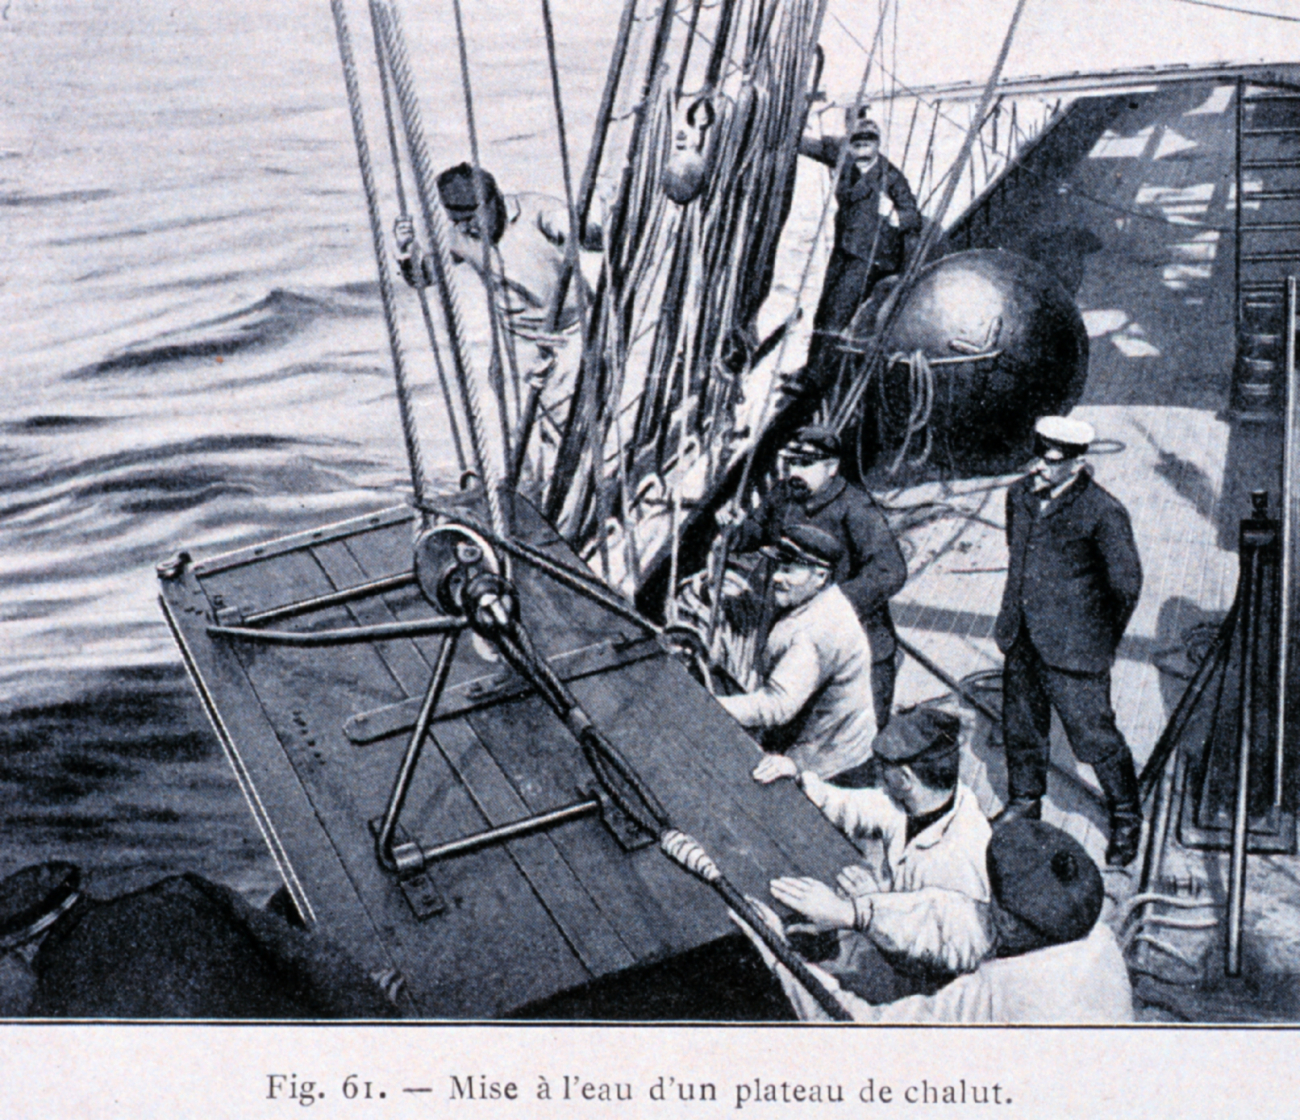 Deploying the doors of the trawling apparatus